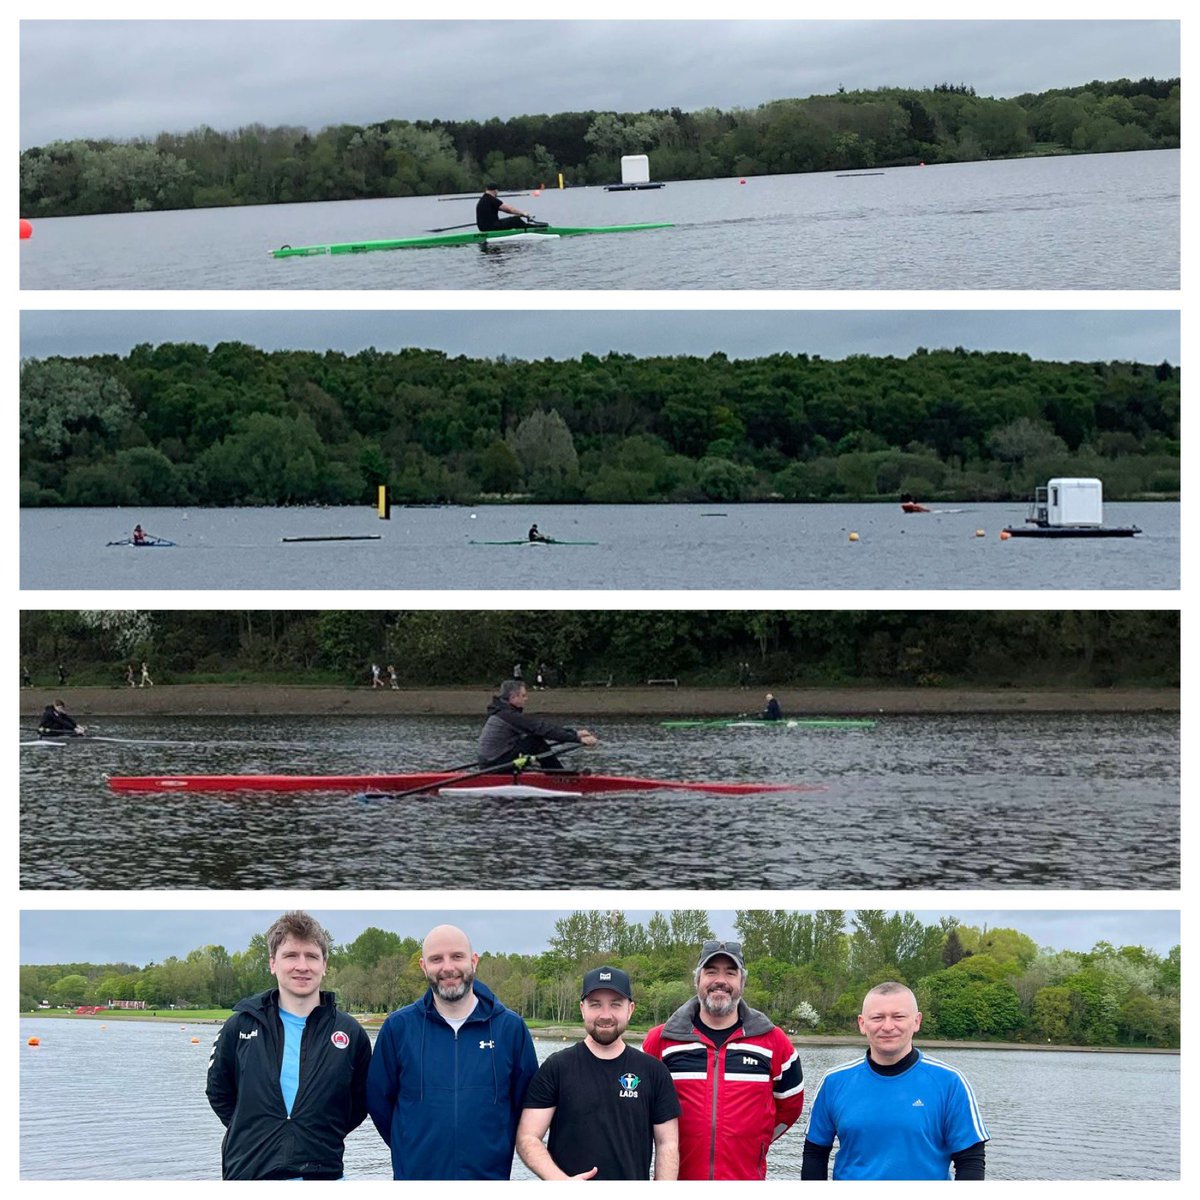 Great to welcome some new Lanarkshire Active Dads to our adult #CommunityRowing group session this morning. Wonderful to see some of the more experienced LADs cutting loose and doing a tour of the loch @SP_RC1 @ScottishRowing @active_nl 🙏@FoundationScot for funding this project